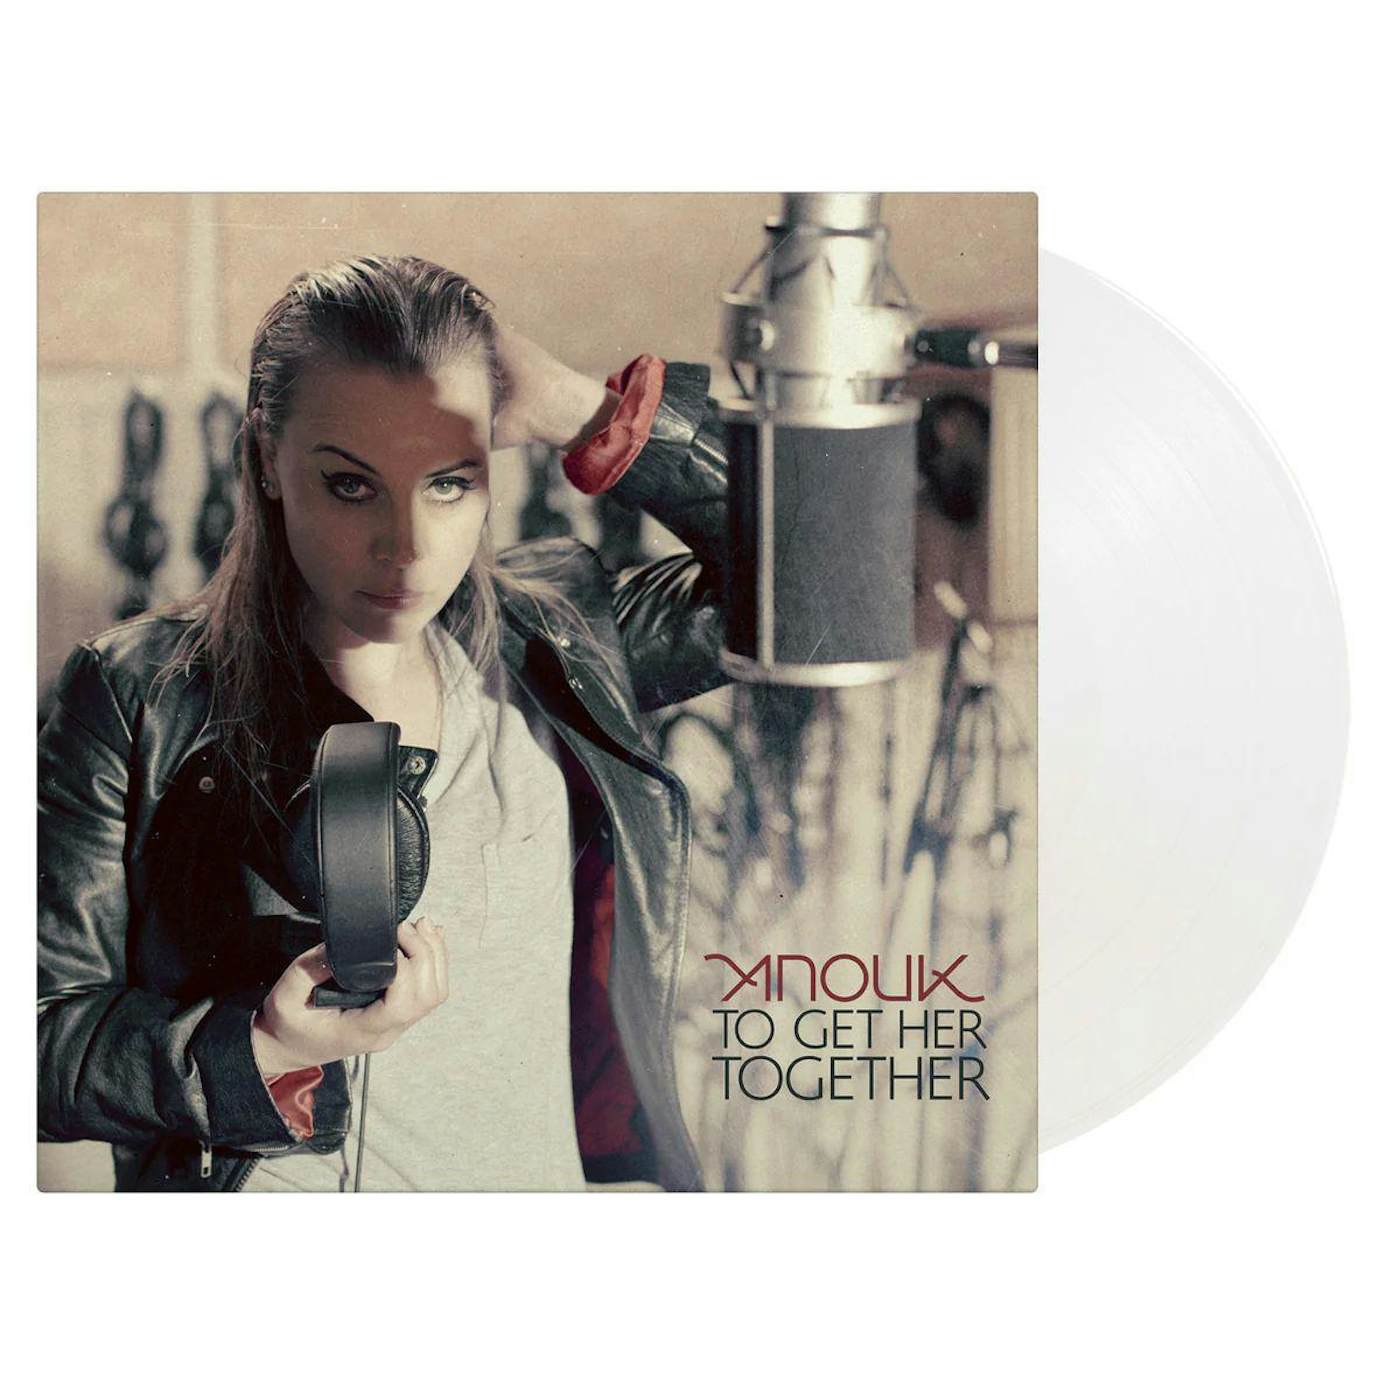 Anouk To Get Her Together (Limited/Crystal Clear/180g) Vinyl Record